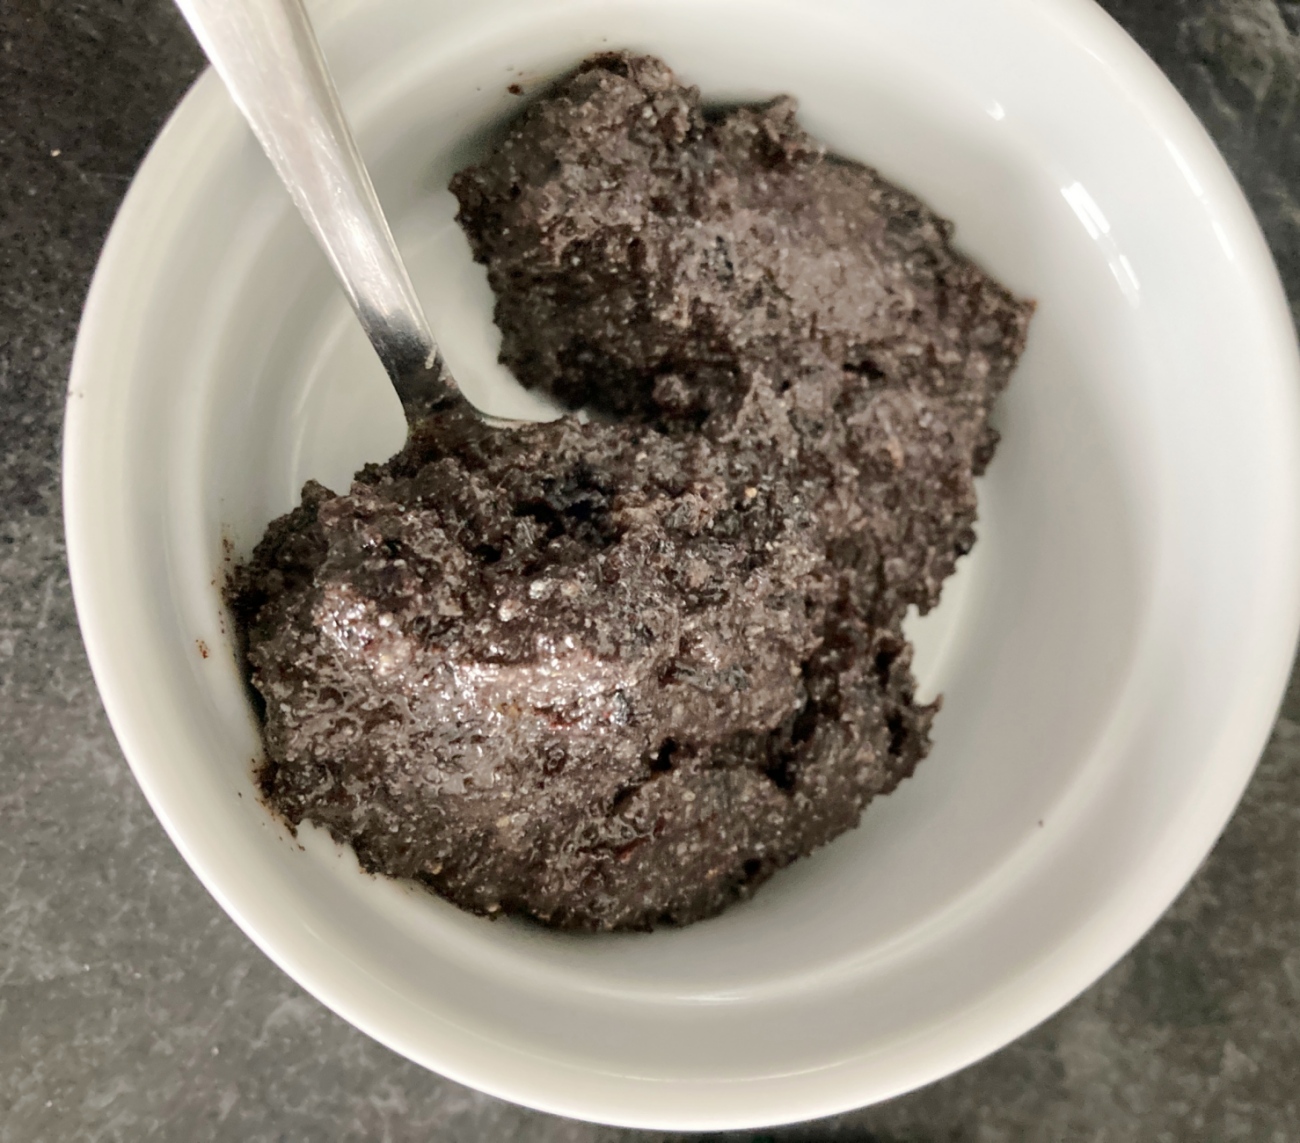 Grind poppy seeds in a spice grinder or clean coffee grinder. Pour into clean food processor along with along with maple syrup, butter, vanilla, salt, and raisins. Pulse until smooth mixture forms.